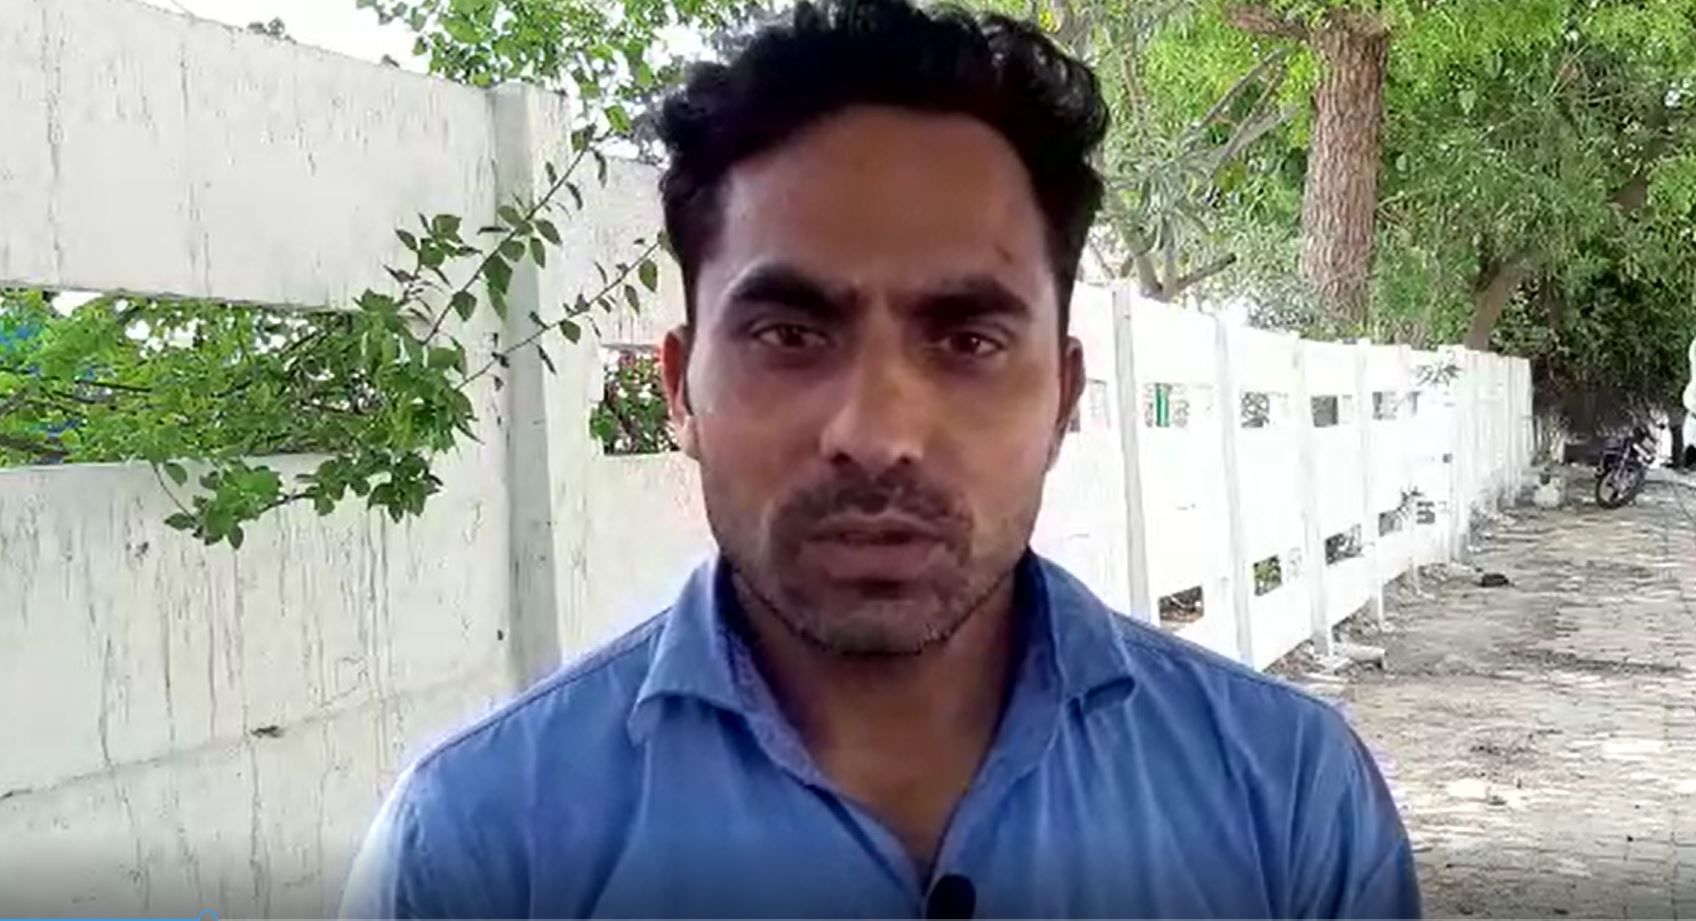 Rly police abused me over a story I did on illegal vendors: Amit Sharma